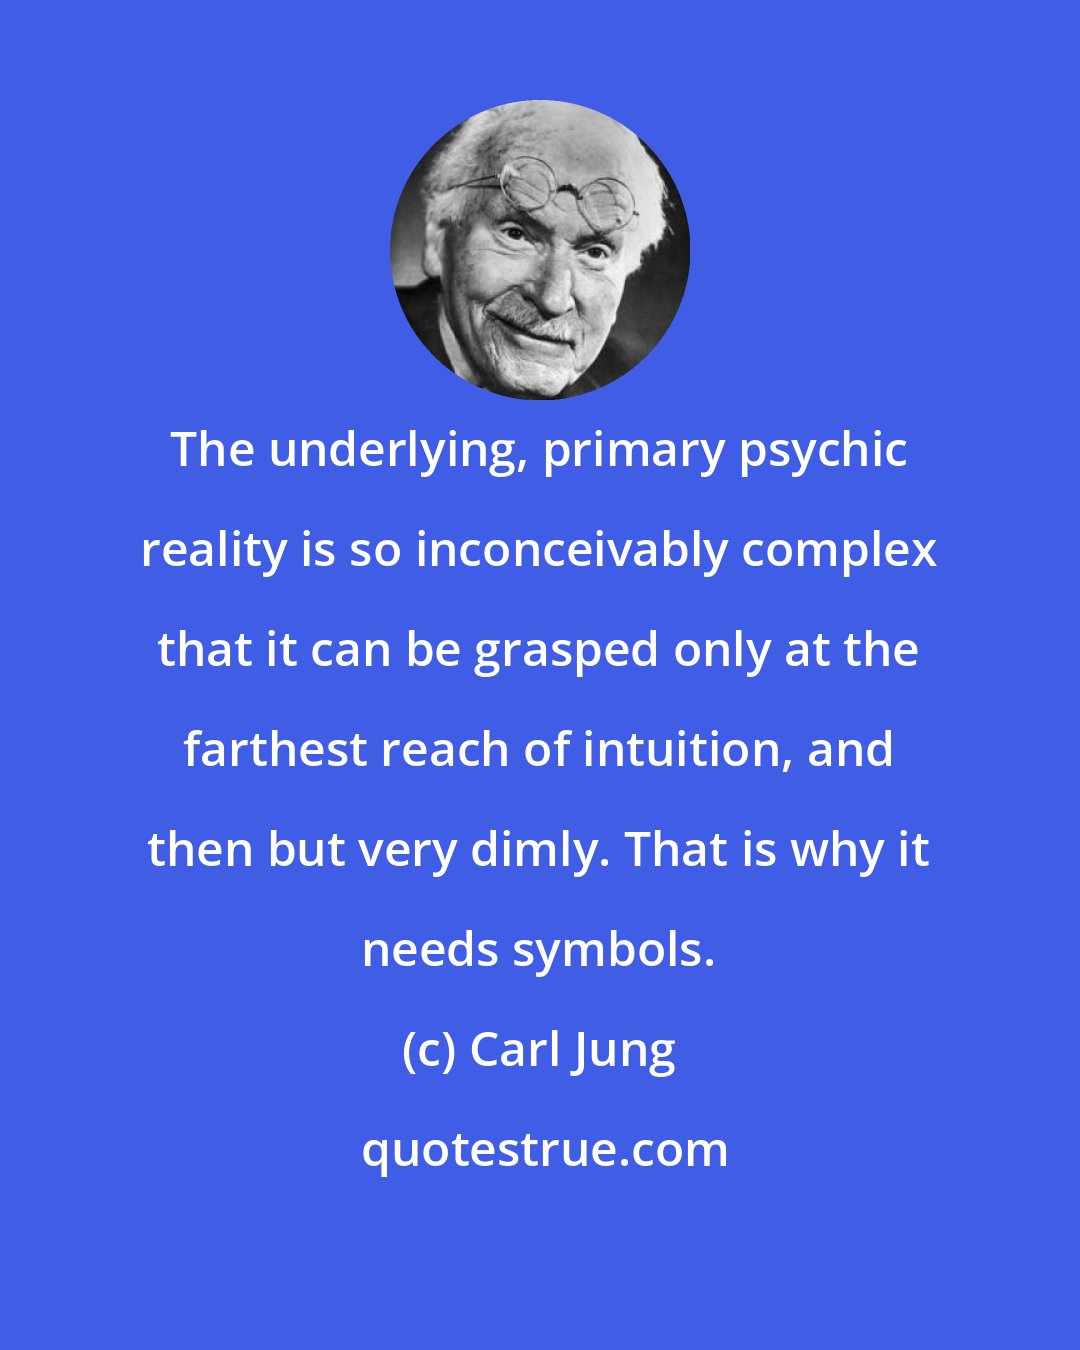 Carl Jung: The underlying, primary psychic reality is so inconceivably complex that it can be grasped only at the farthest reach of intuition, and then but very dimly. That is why it needs symbols.